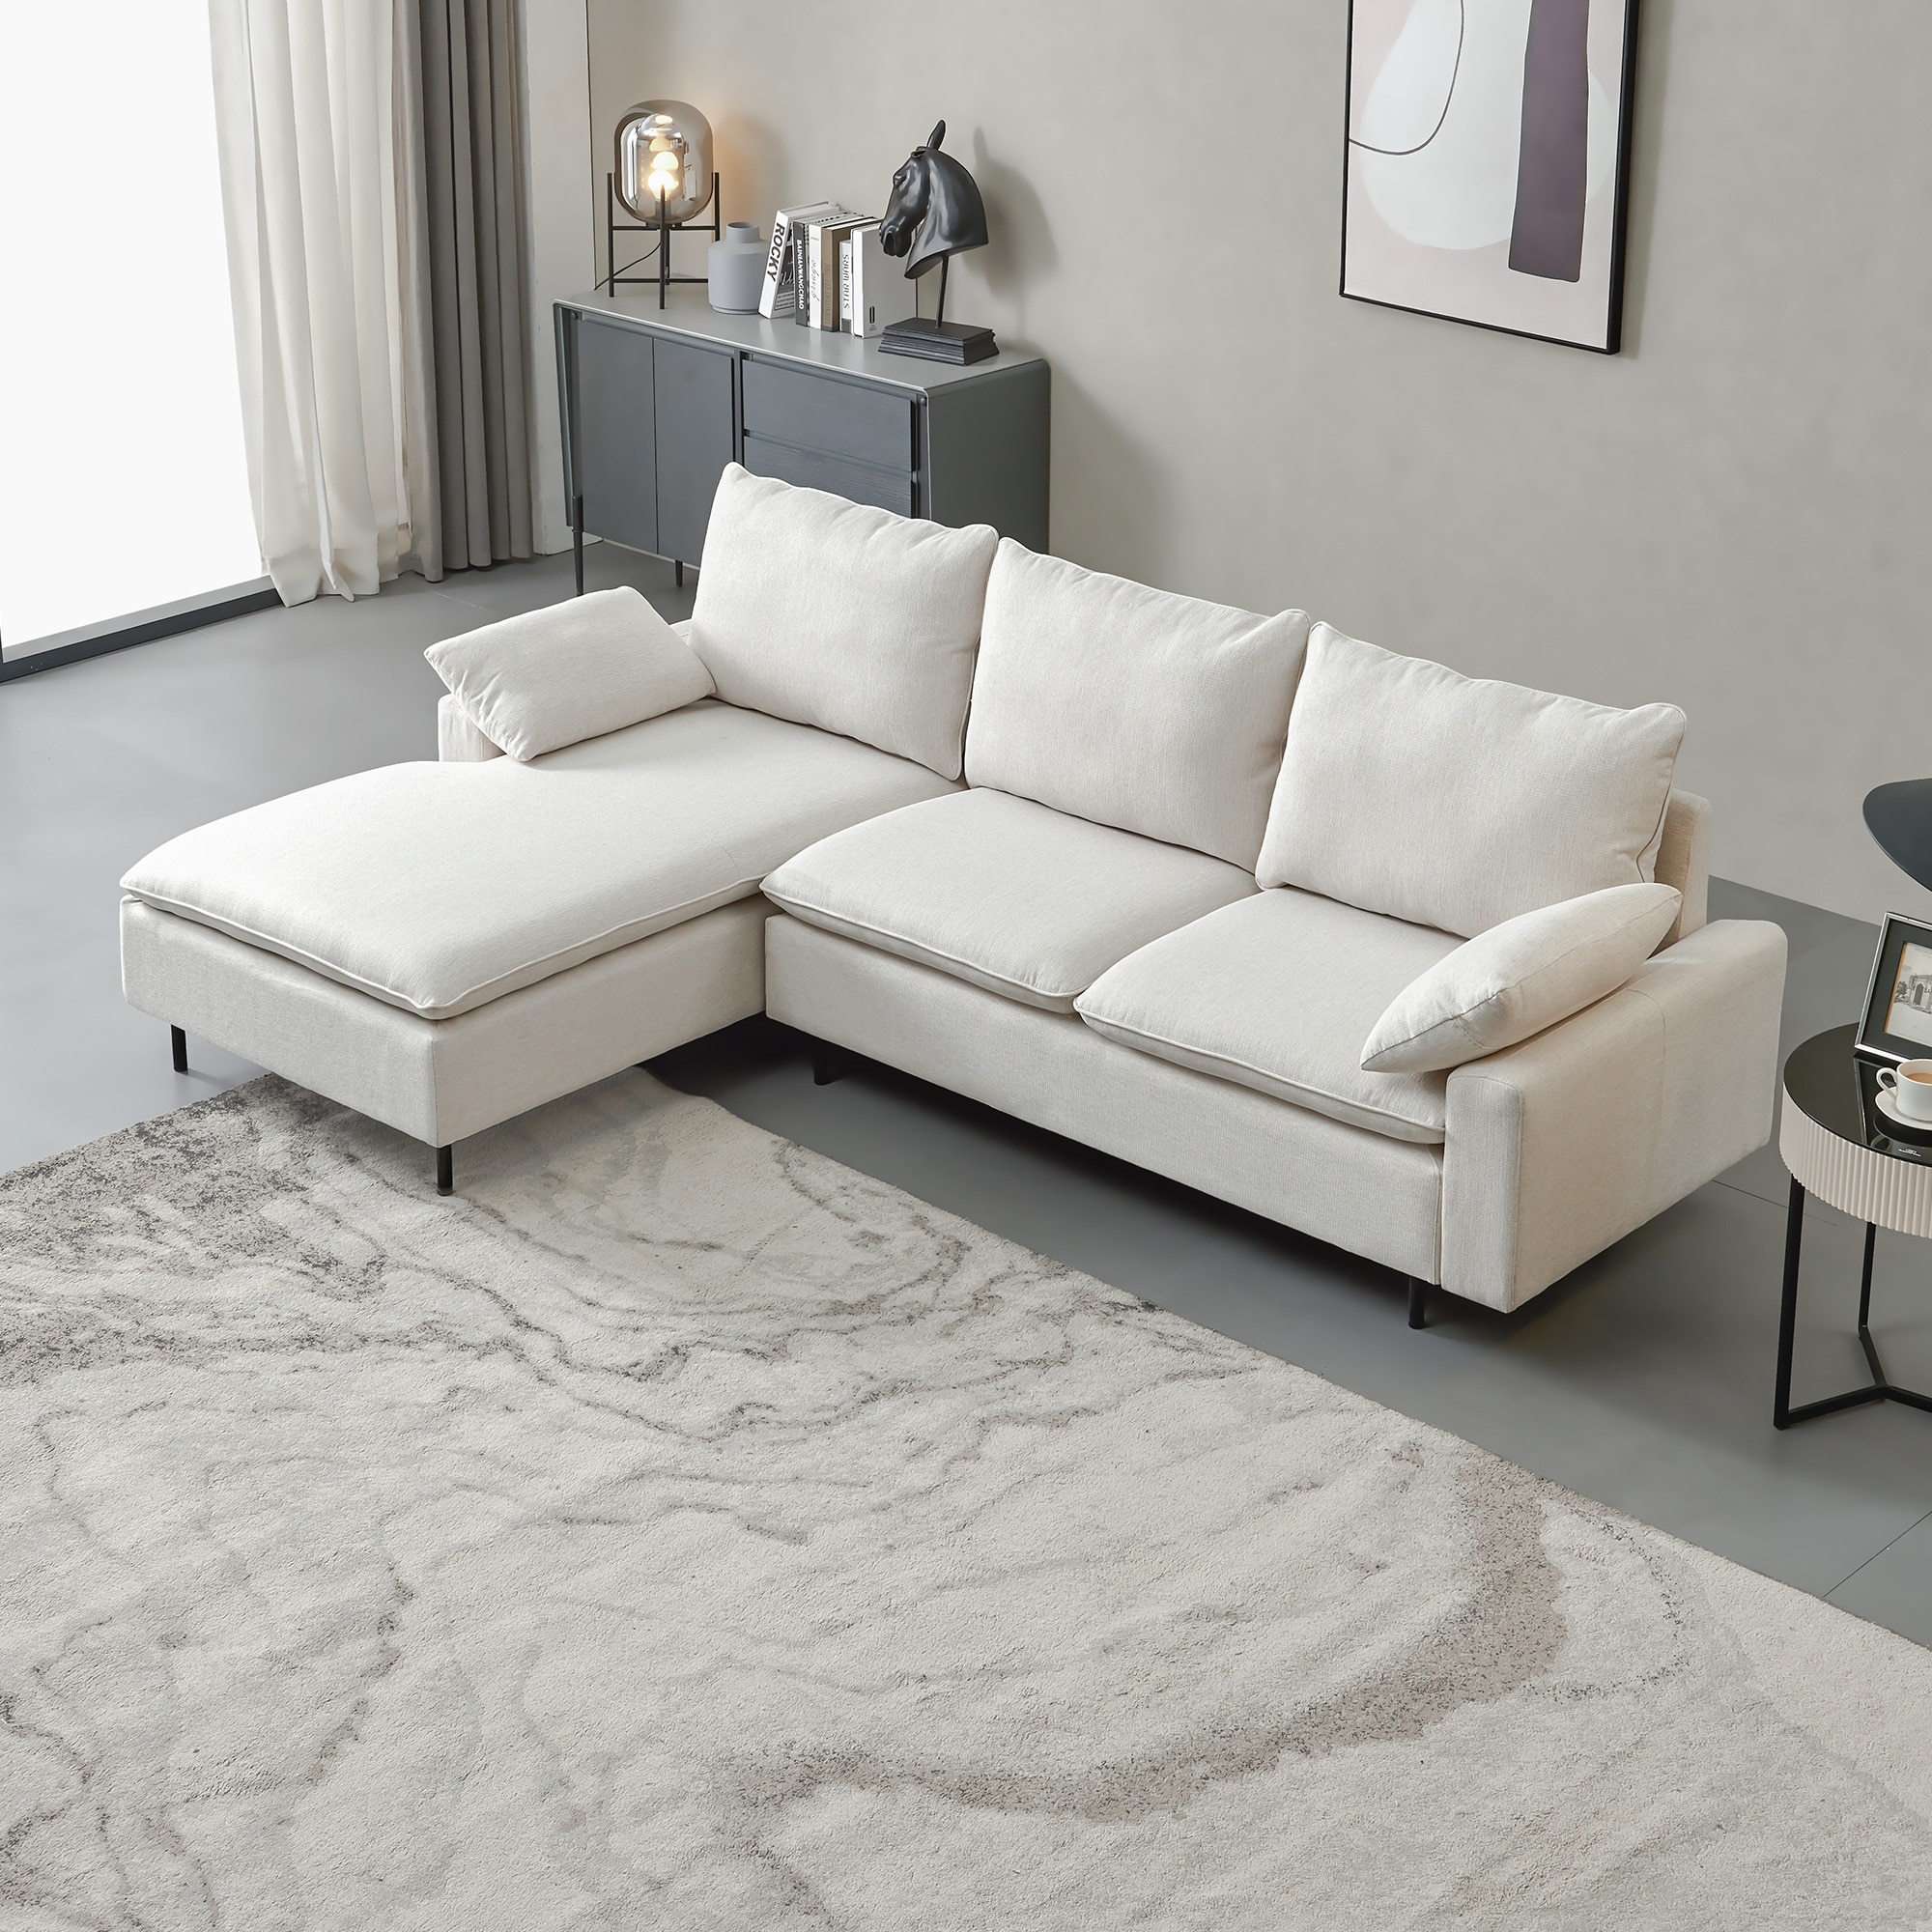 L-shaped Linen Upholstered Sectional Sofa With Right Chaise  Lounge Couch For Living Room